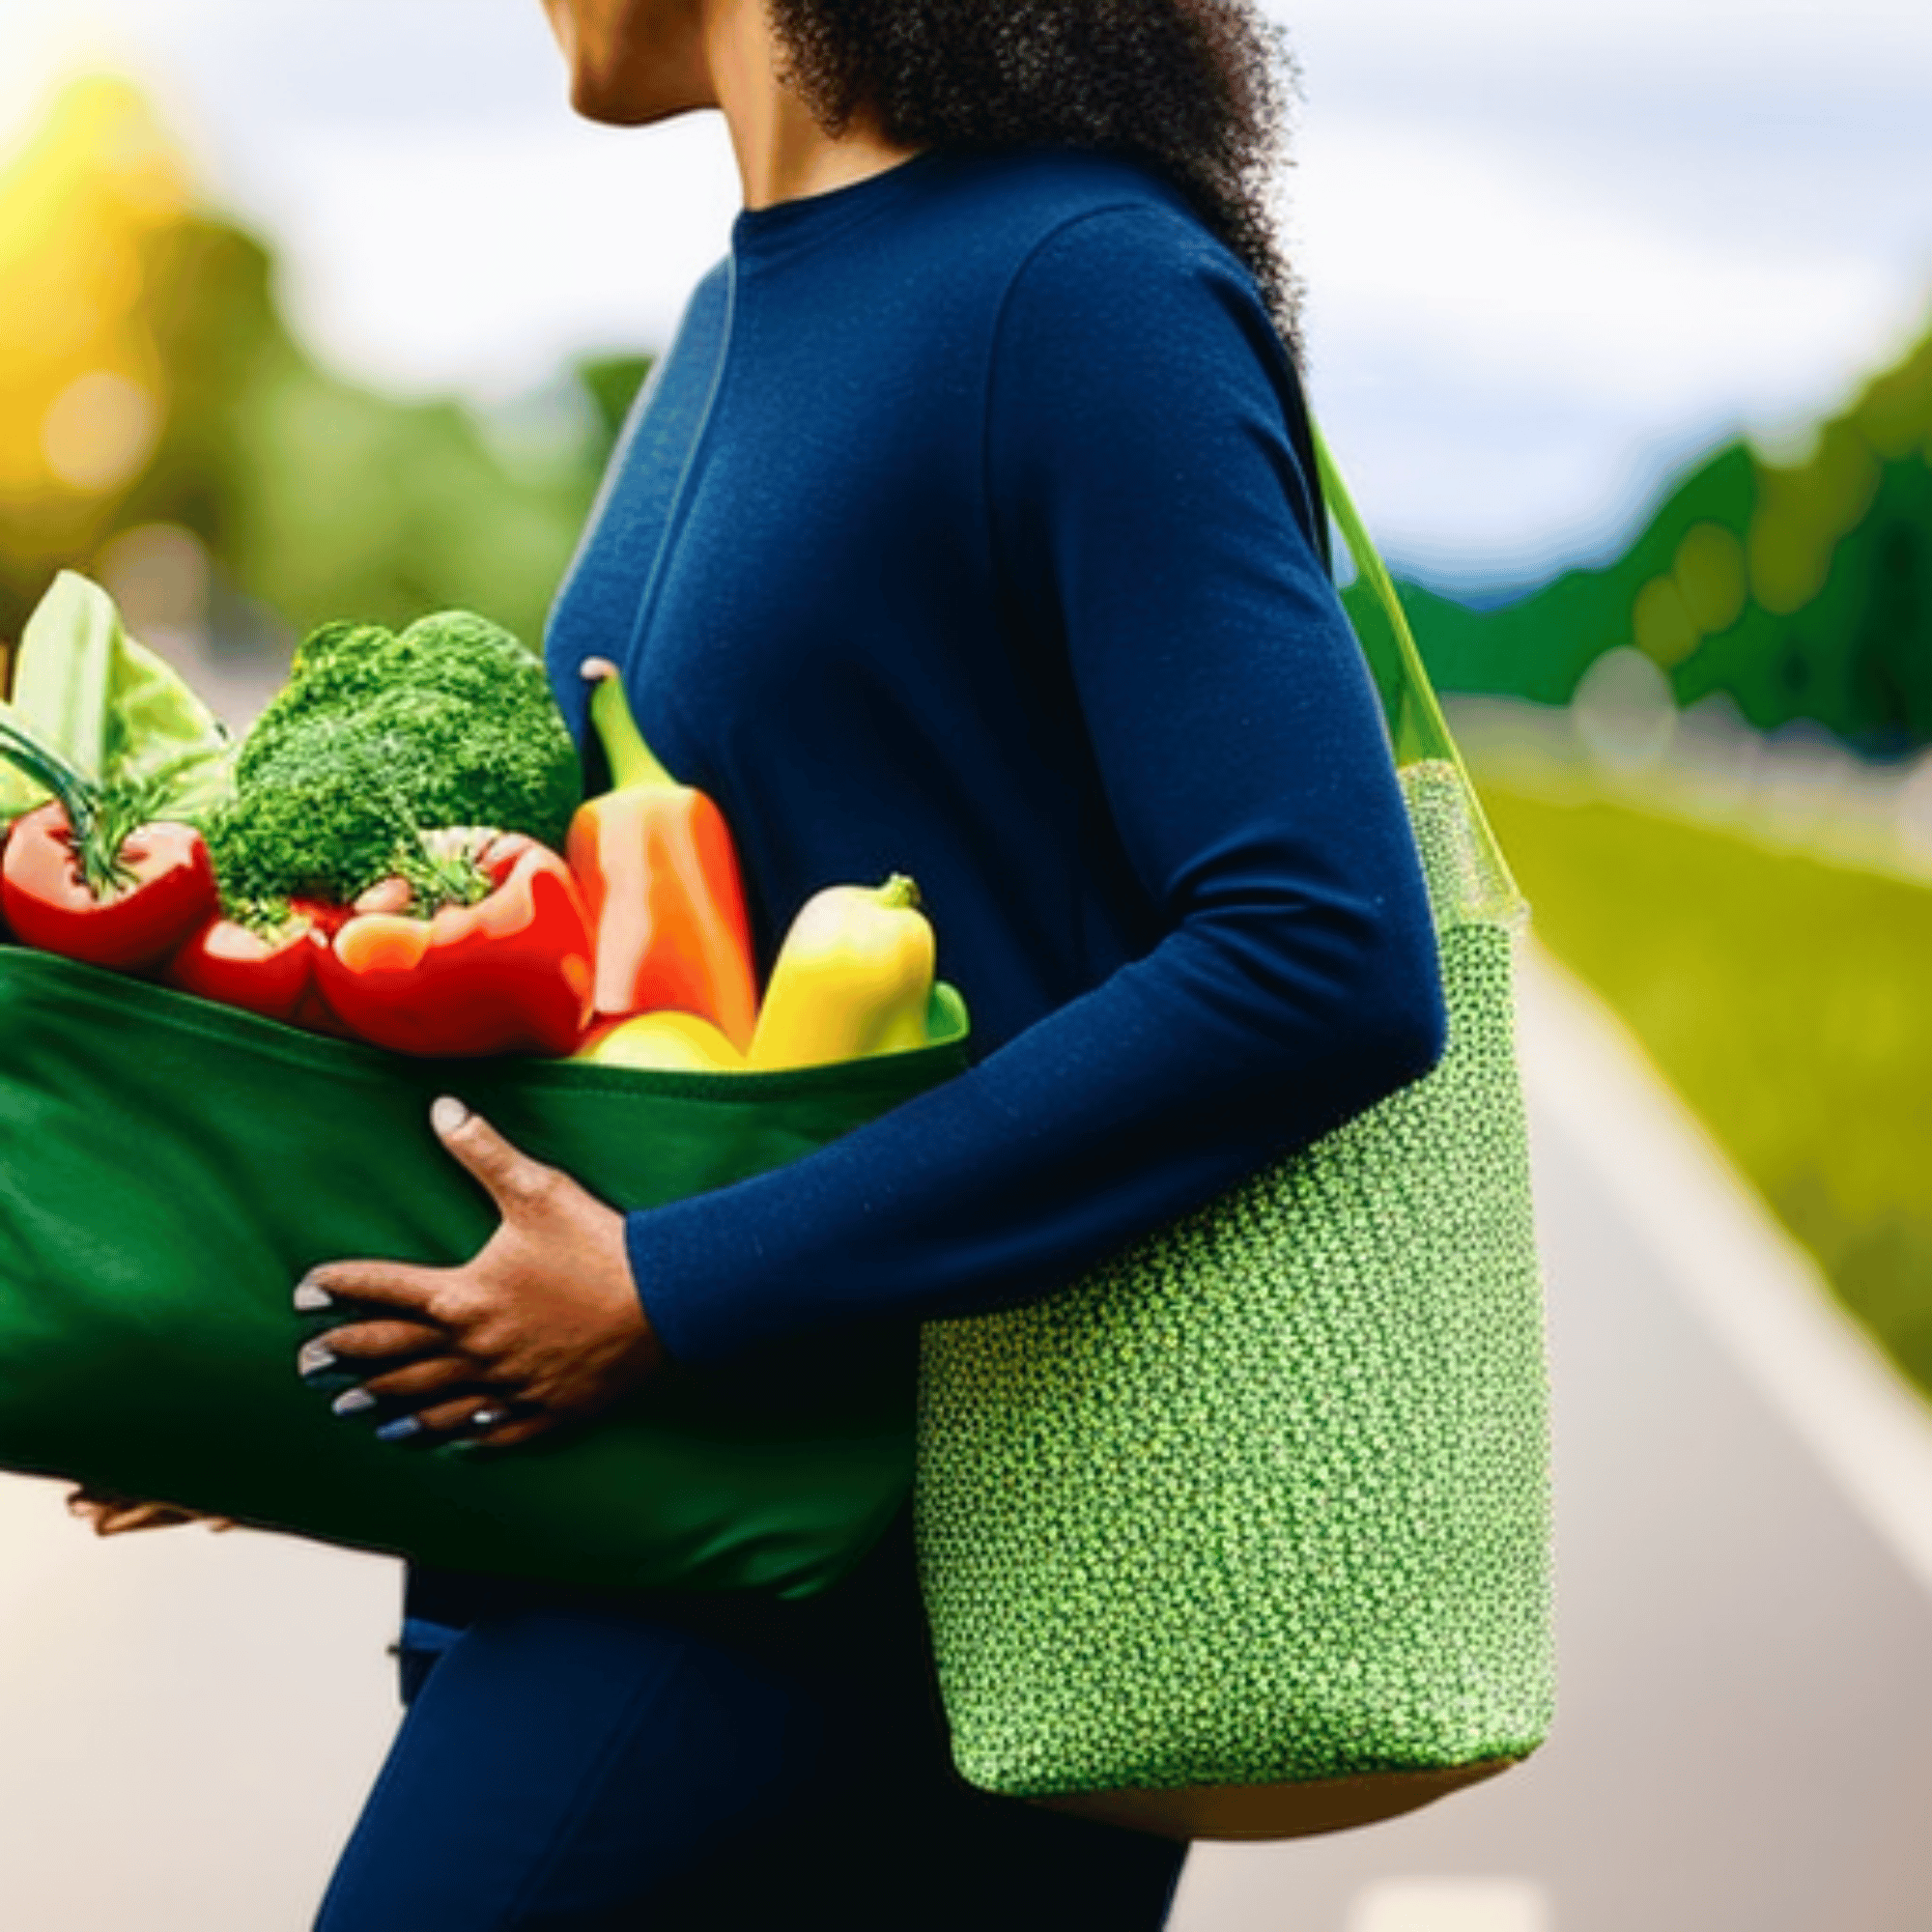 A picture of a person carrying a reusable grocery bag full of fresh produce